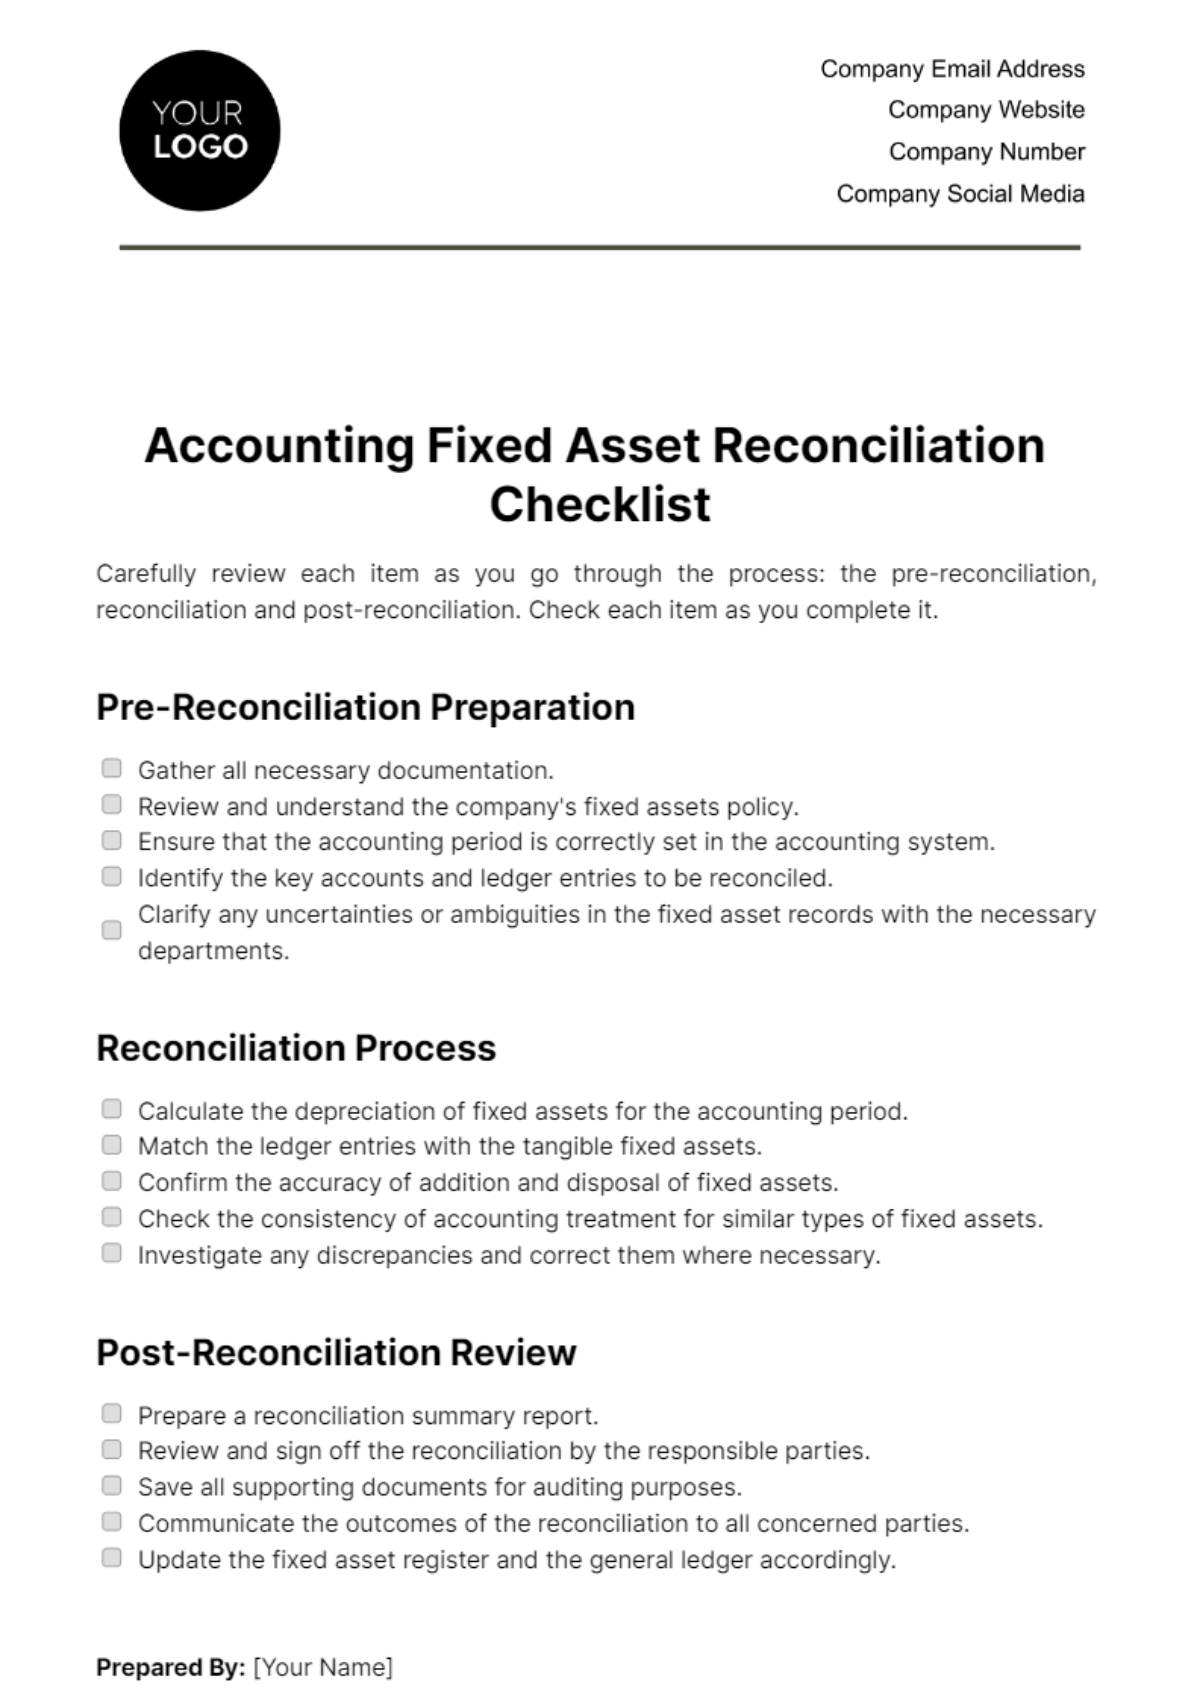 Accounting Fixed Asset Reconciliation Checklist Template